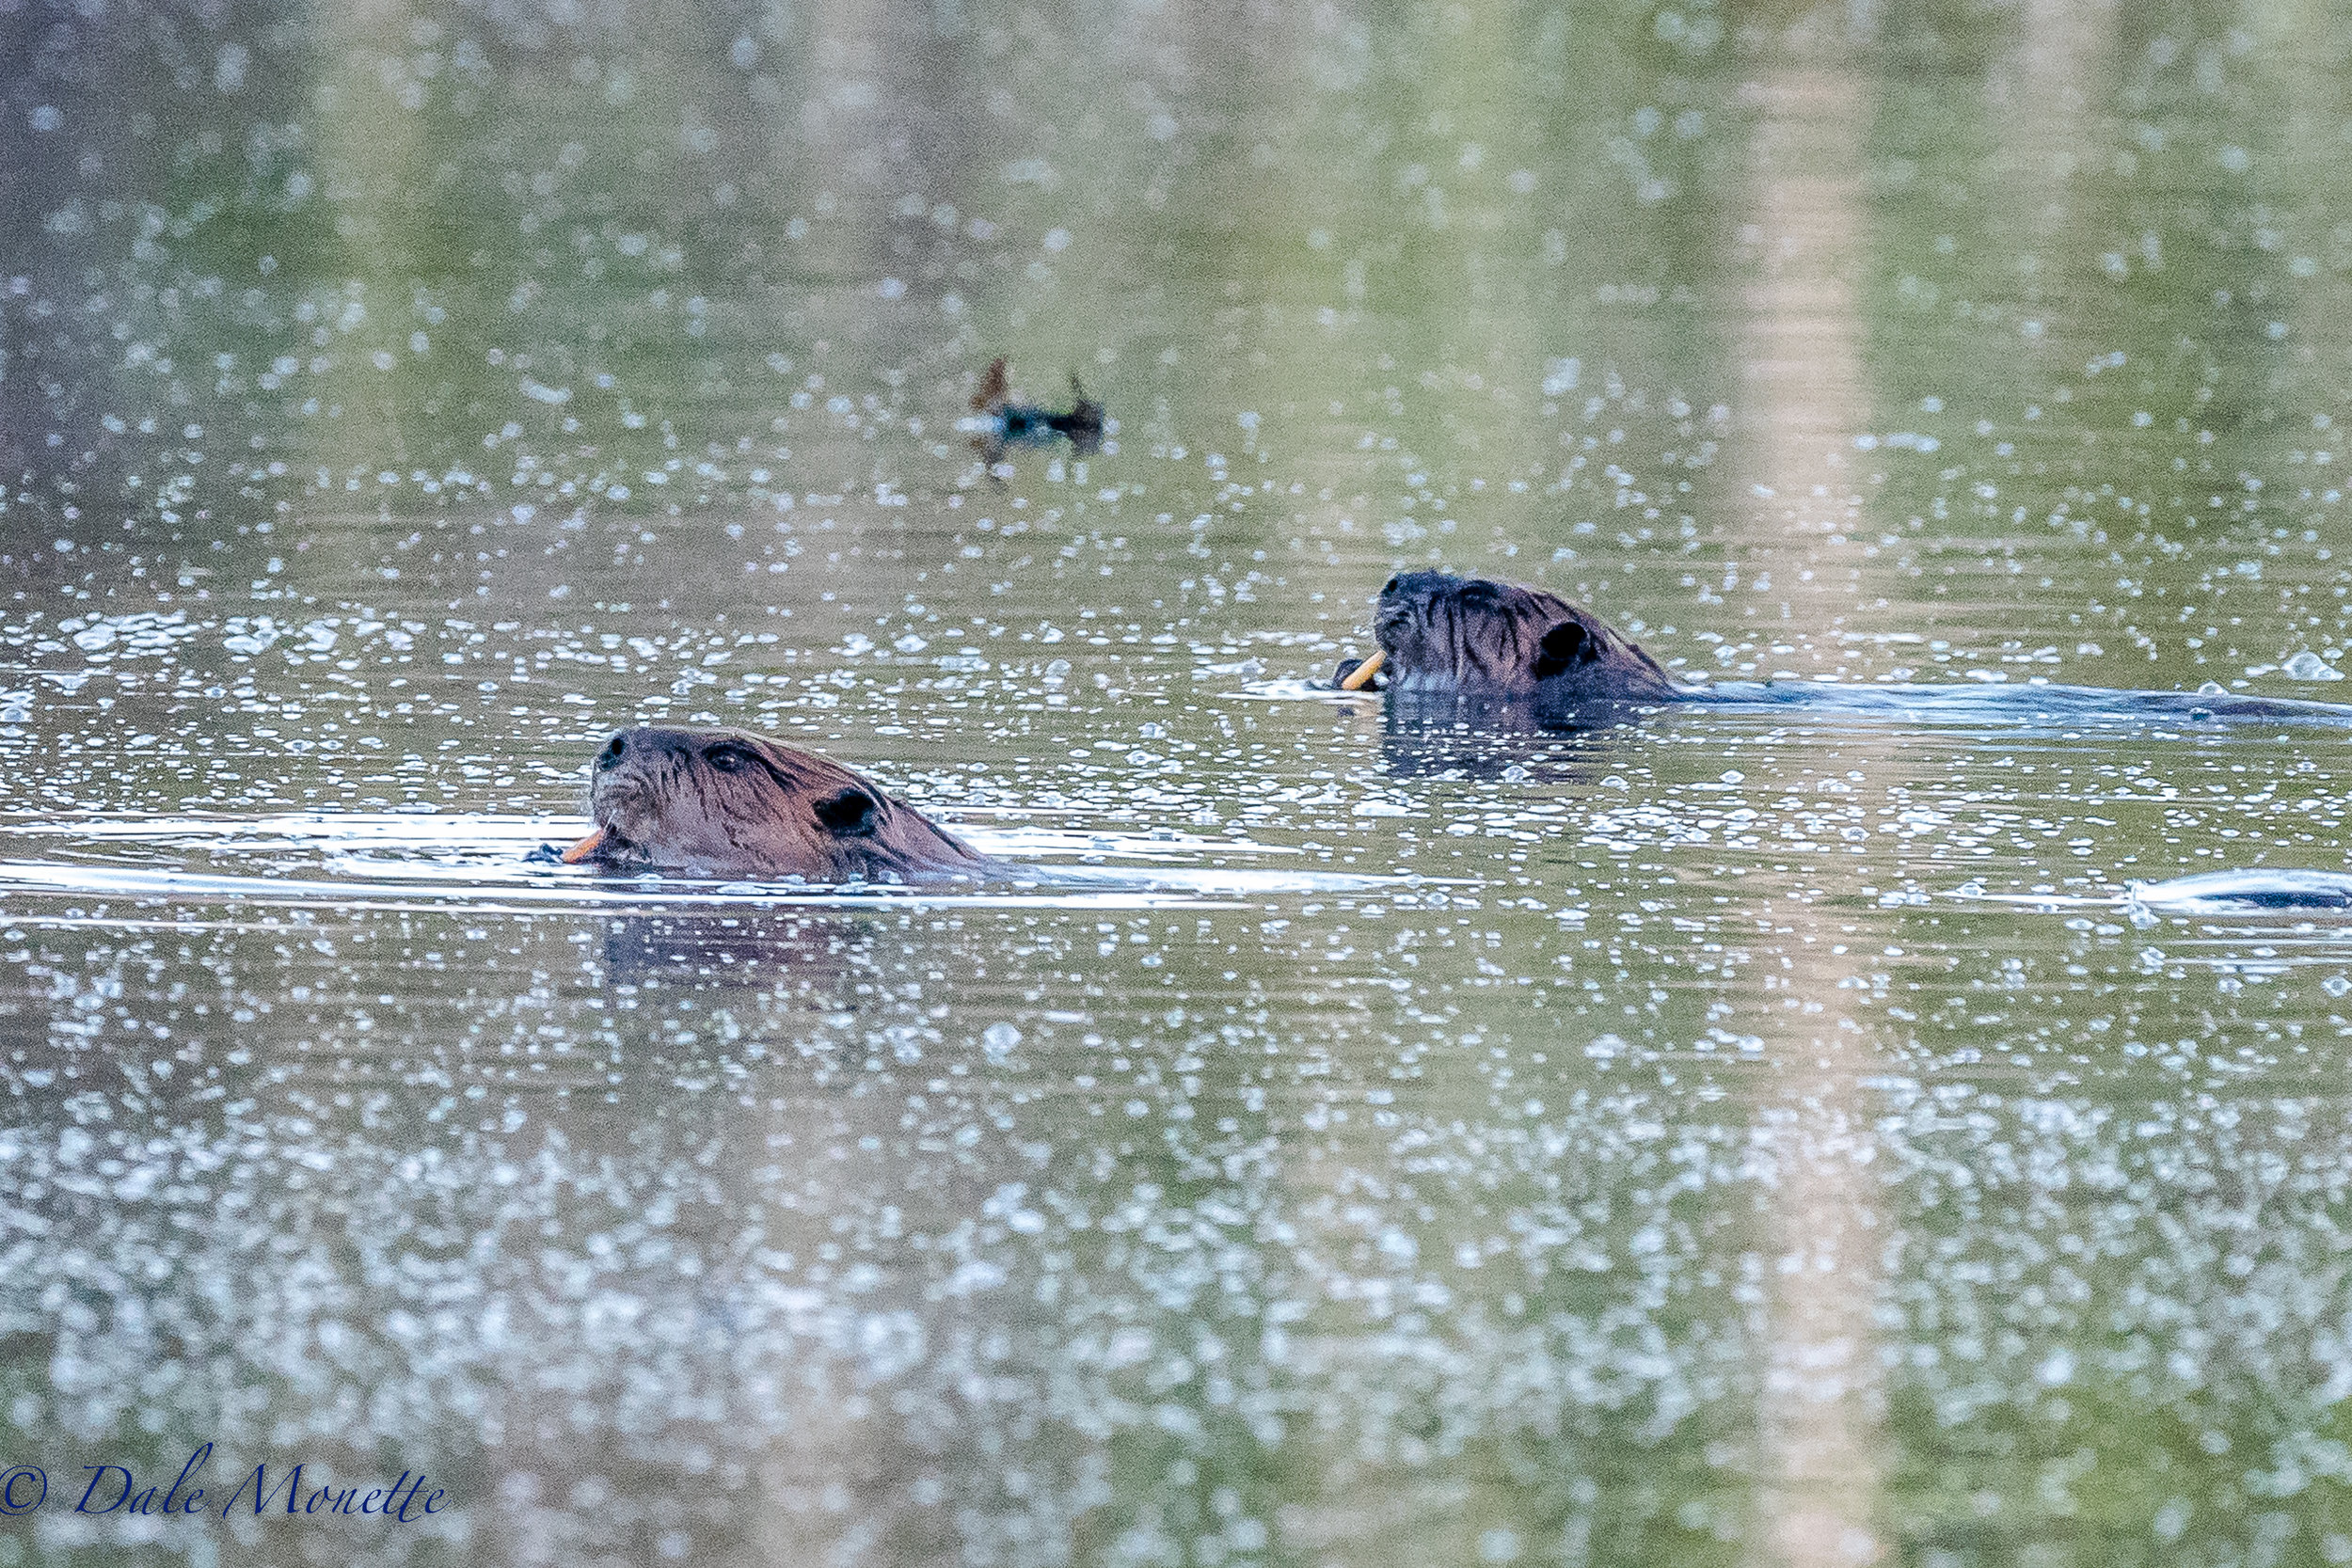   I walked in to see my beaver buddies this morning and found them munching on water lily roots. They love this time of years as they can get fresh greens to add to their diets. &nbsp;4/17/17  